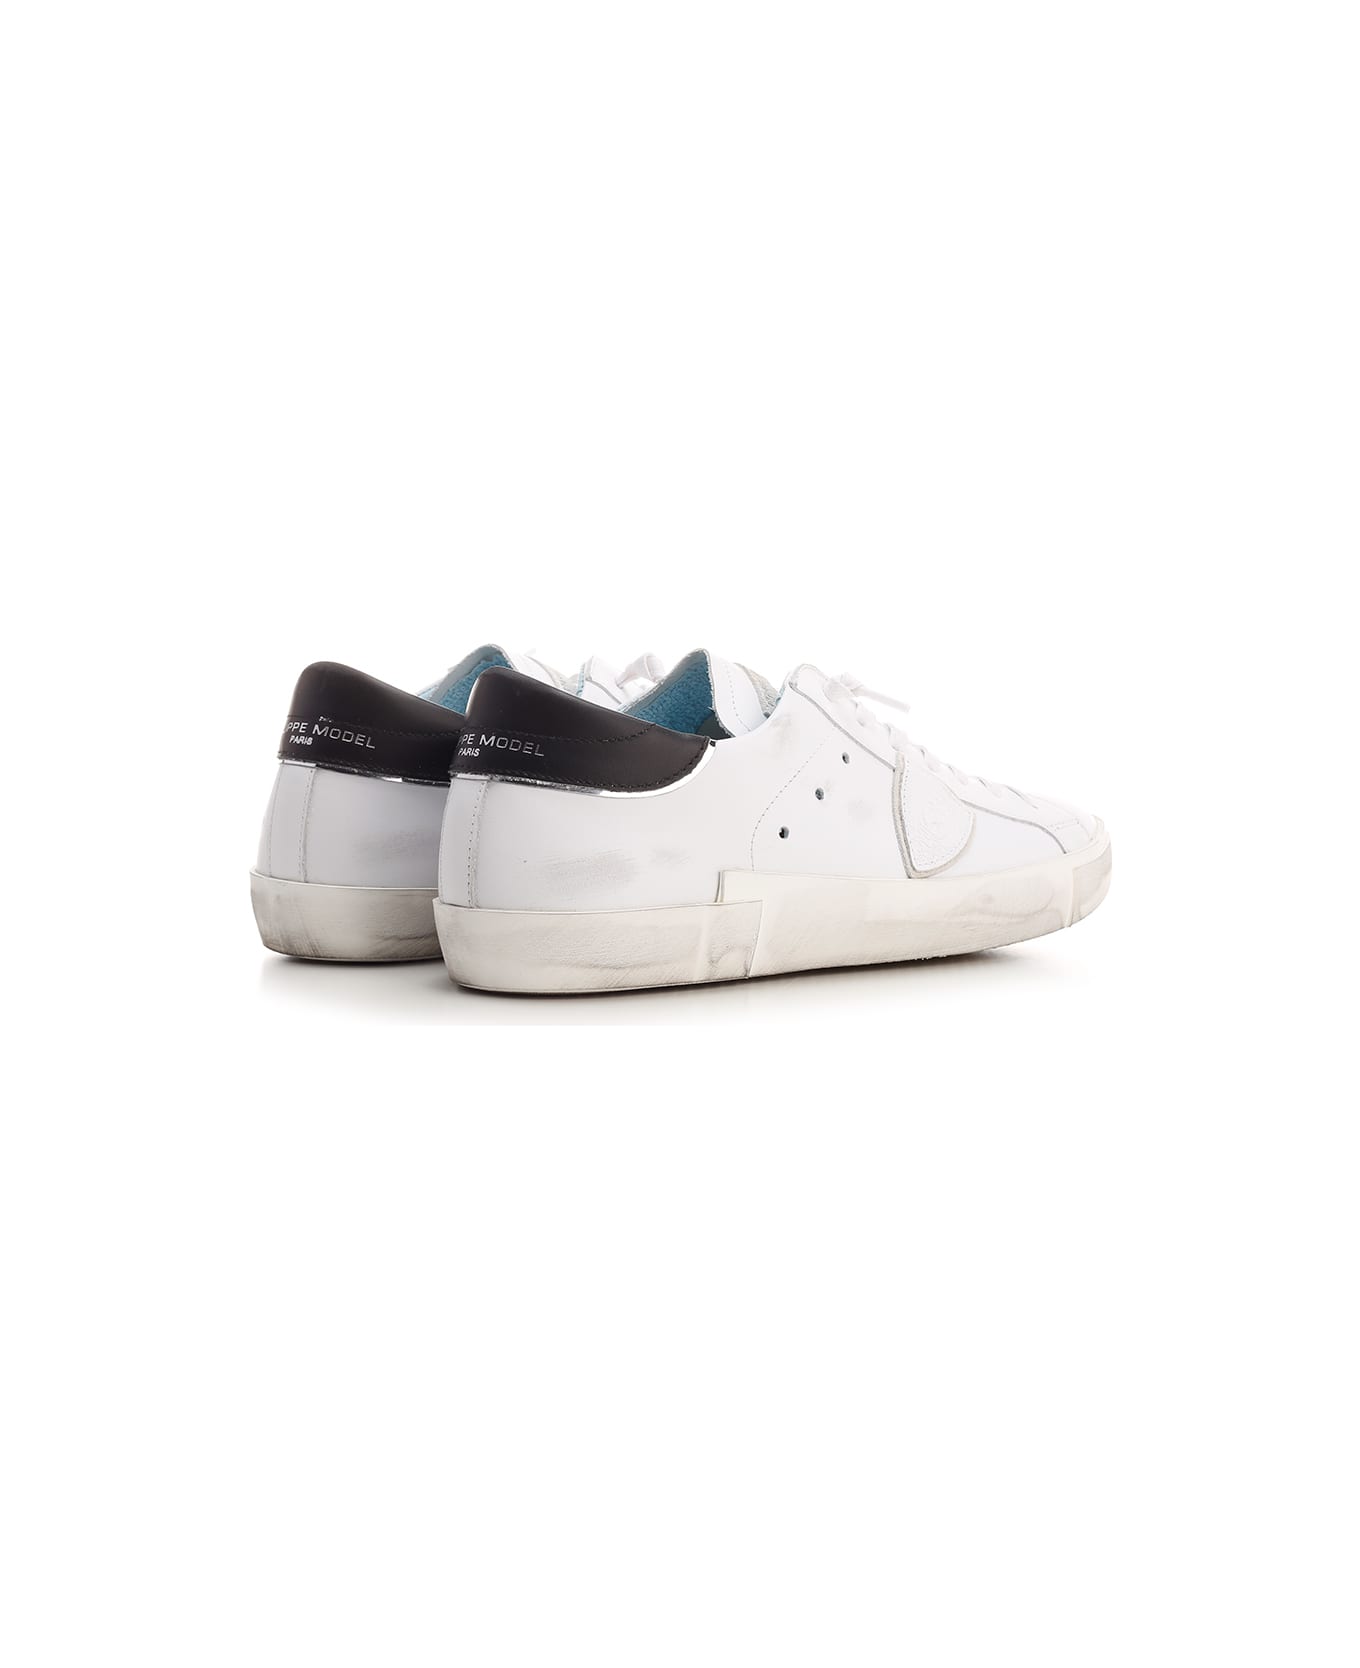 Philippe Model White 'prsx' Leather Sneakers With Black Heel Tab - Bianco